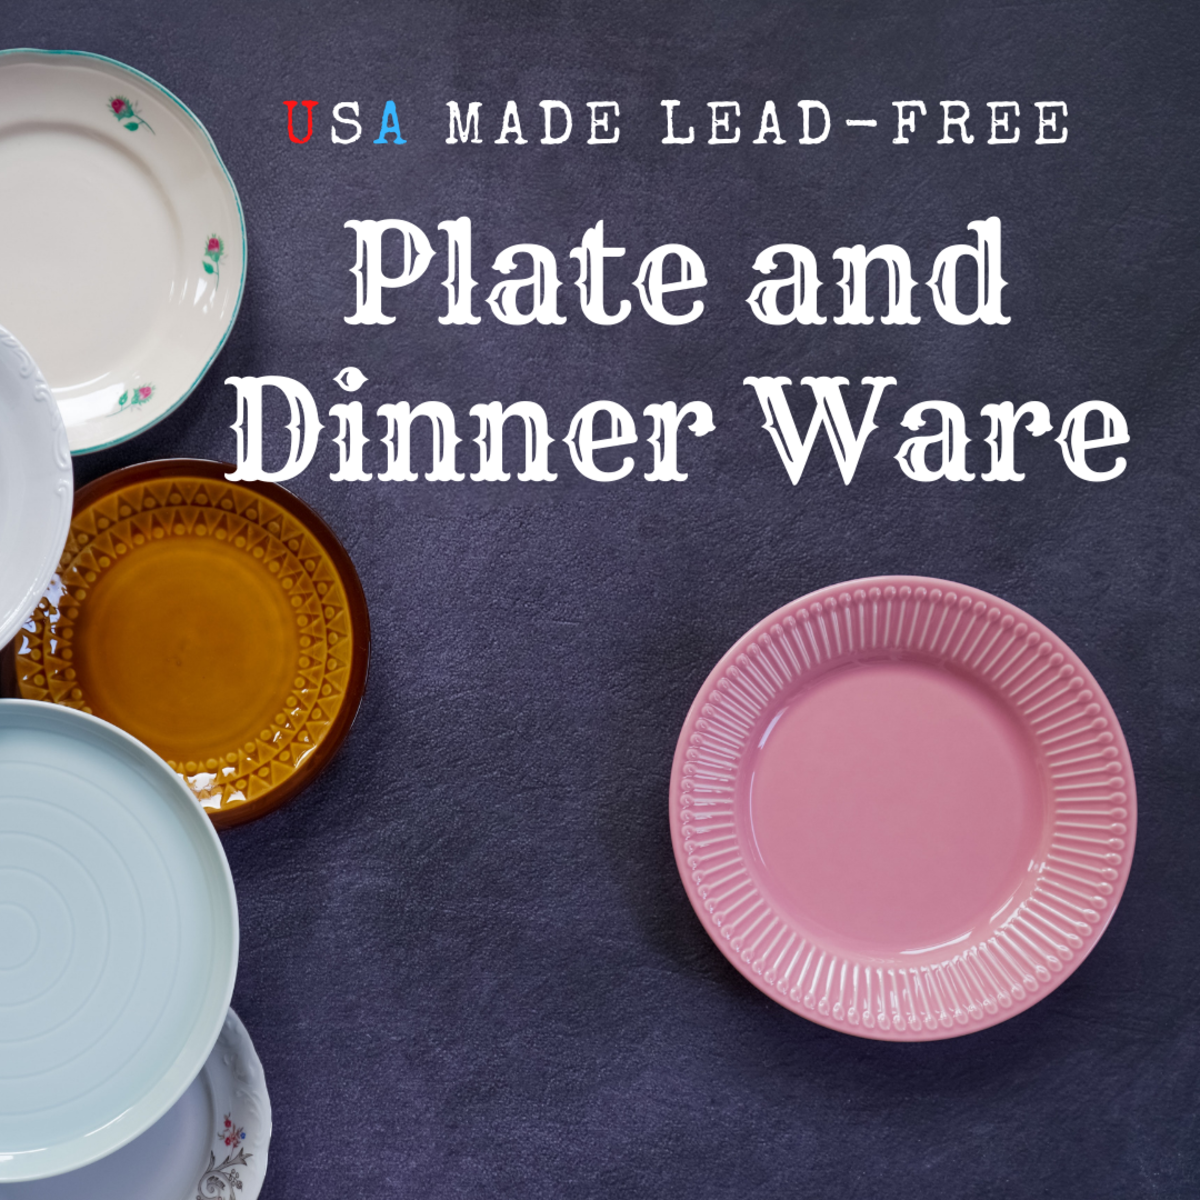 Plate and dInnerware made in the USA—lead-free!